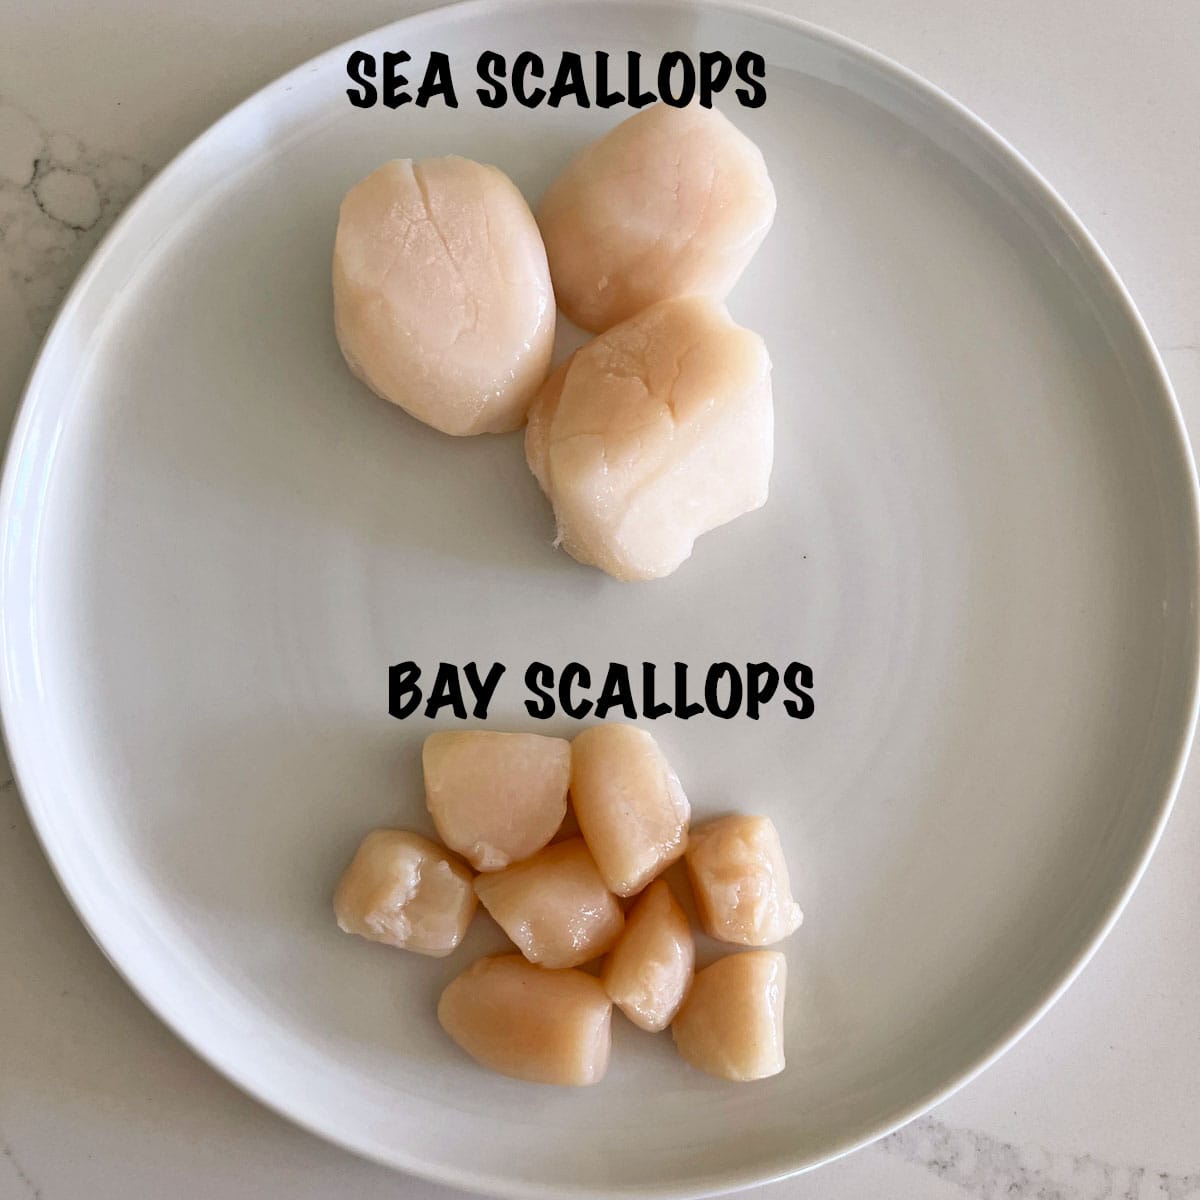 Sea scallops and bay scallops on a plate, in a photo that shows the difference between them. 